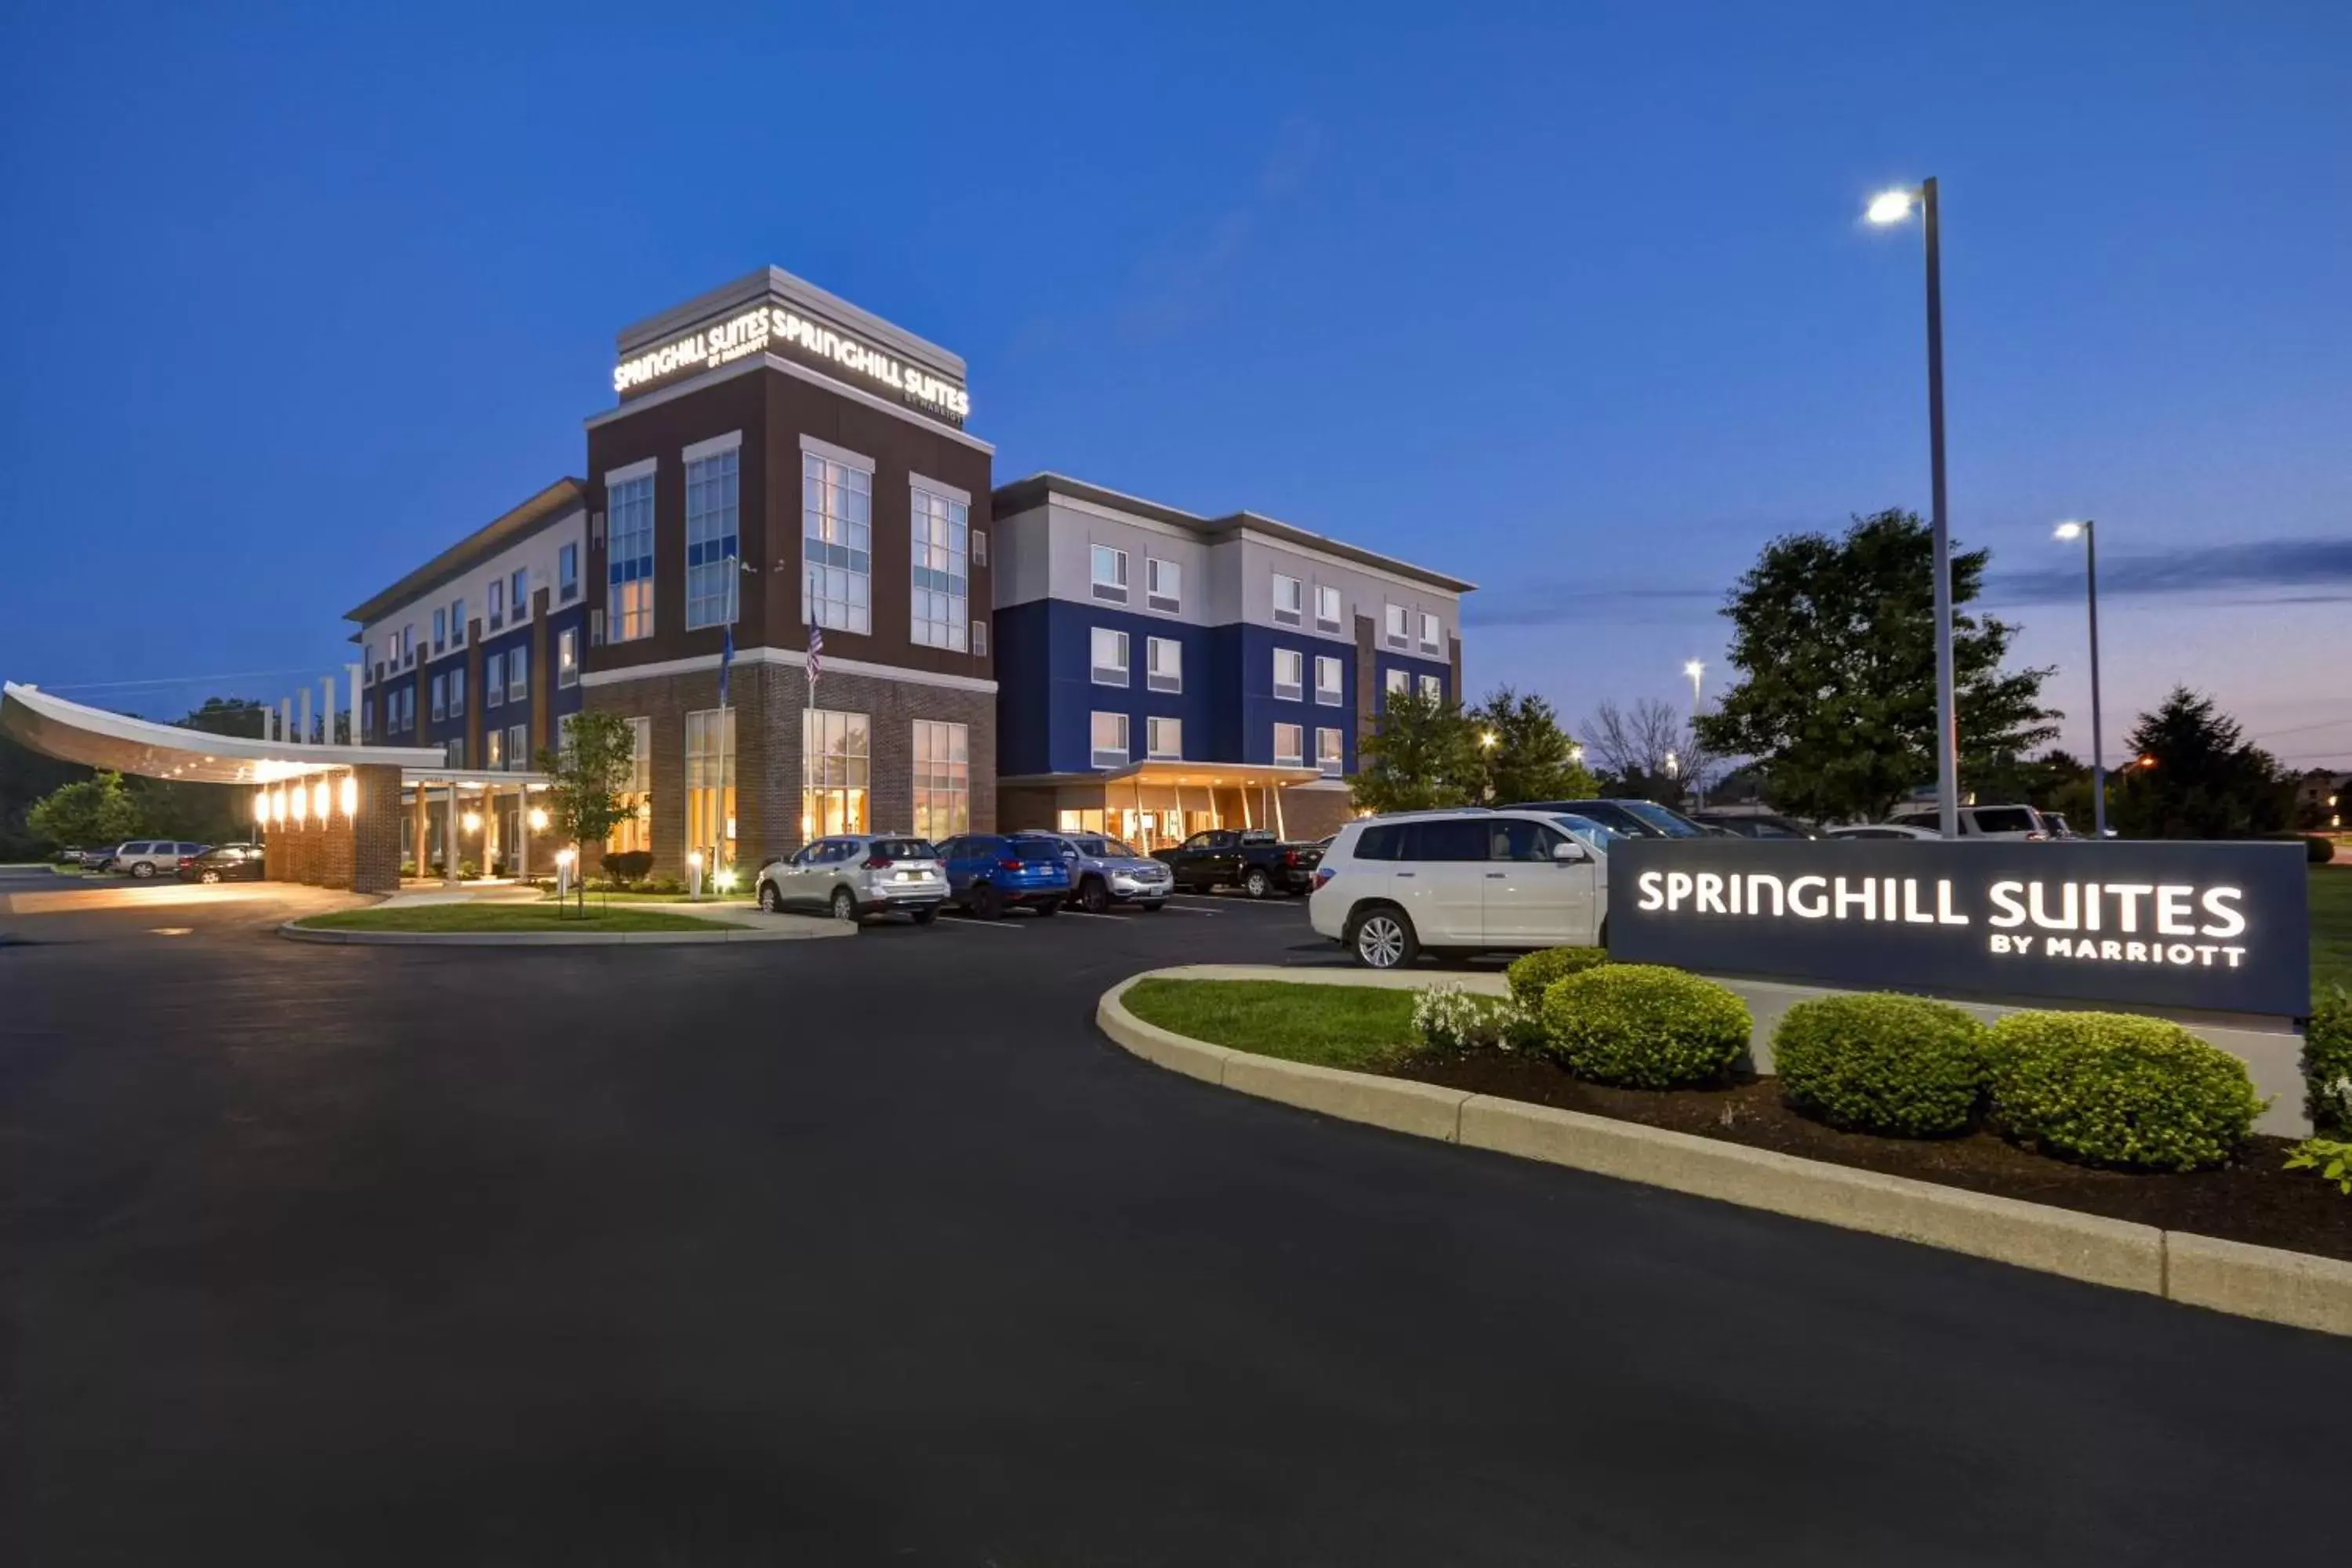 Property Building in SpringHill Suites by Marriott Indianapolis Airport/Plainfield